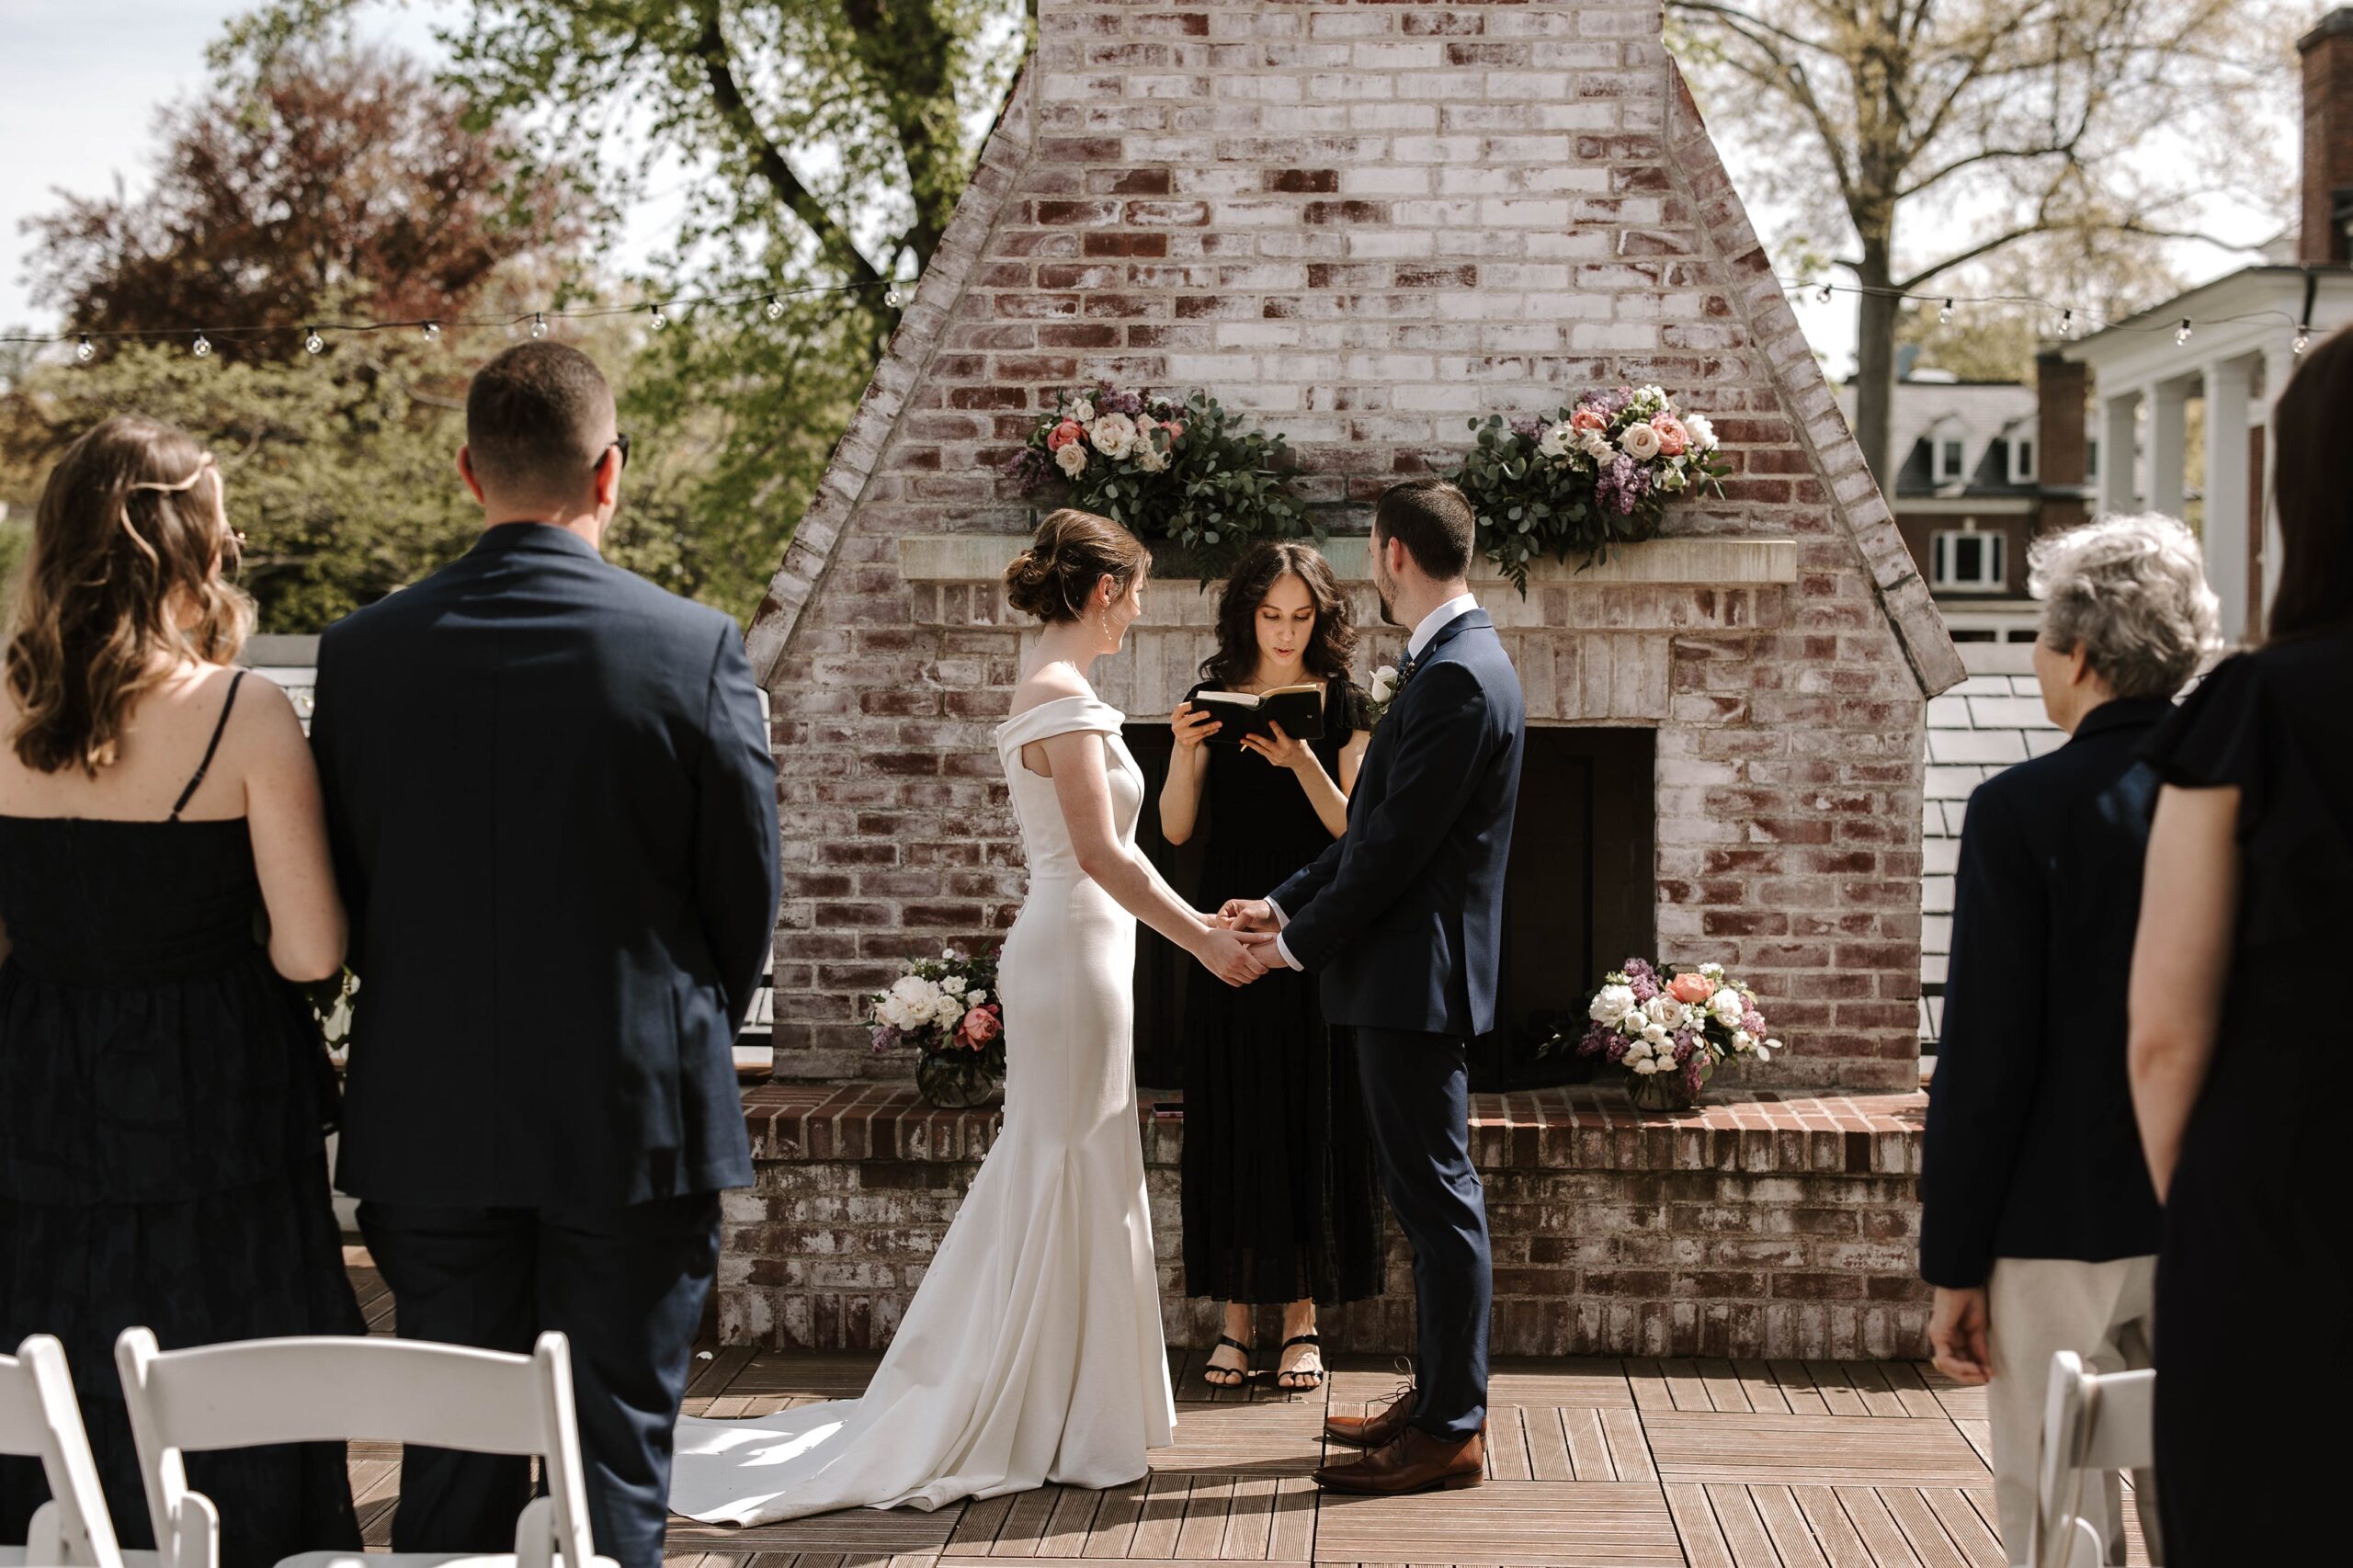 The couple had a small wedding ceremony at Inn on Boltwood